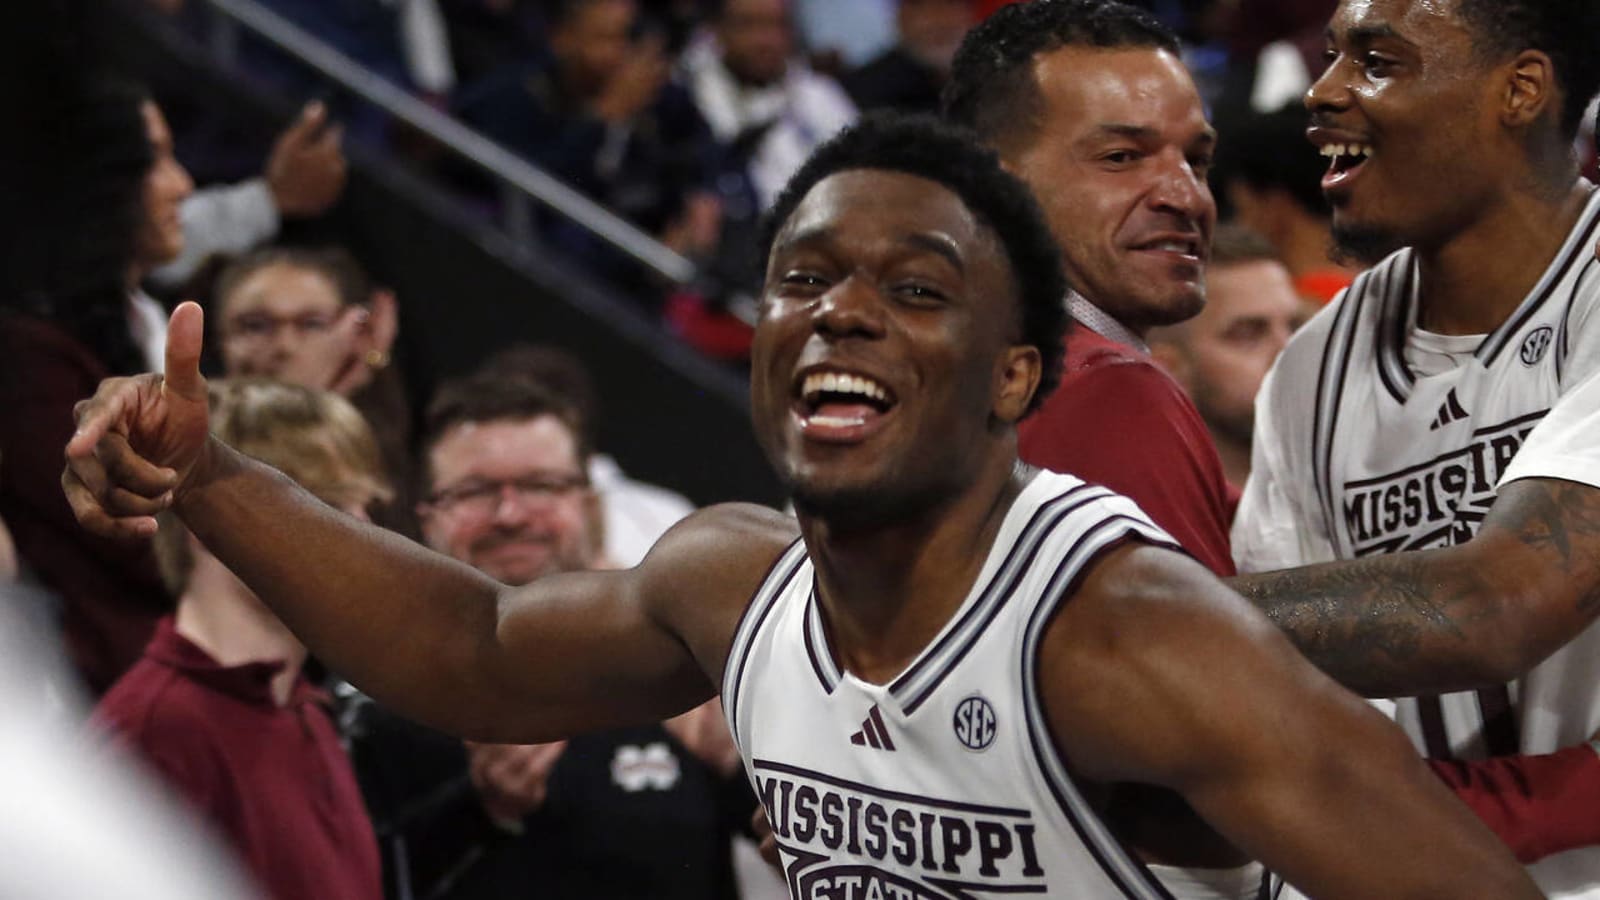 Mississippi State stuns No. 8 Auburn, earning second statement win